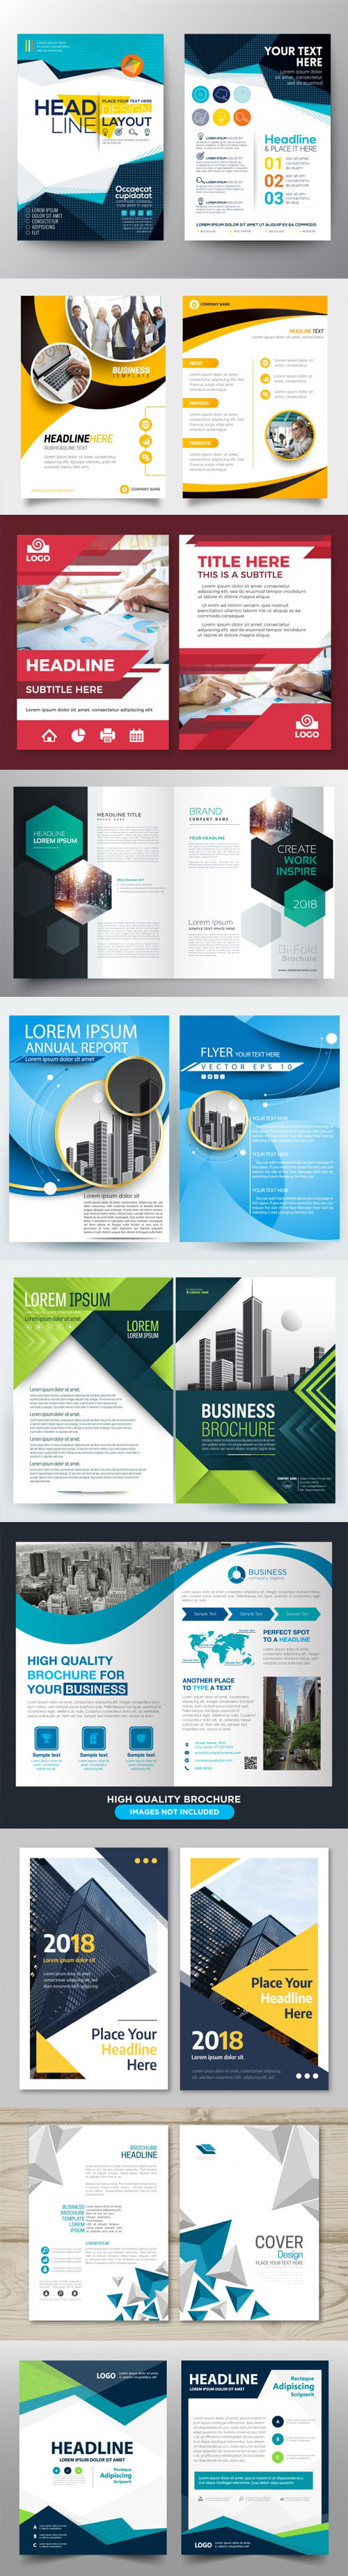 10 Modern and Professional Flyers/Brochures Templates in Vector